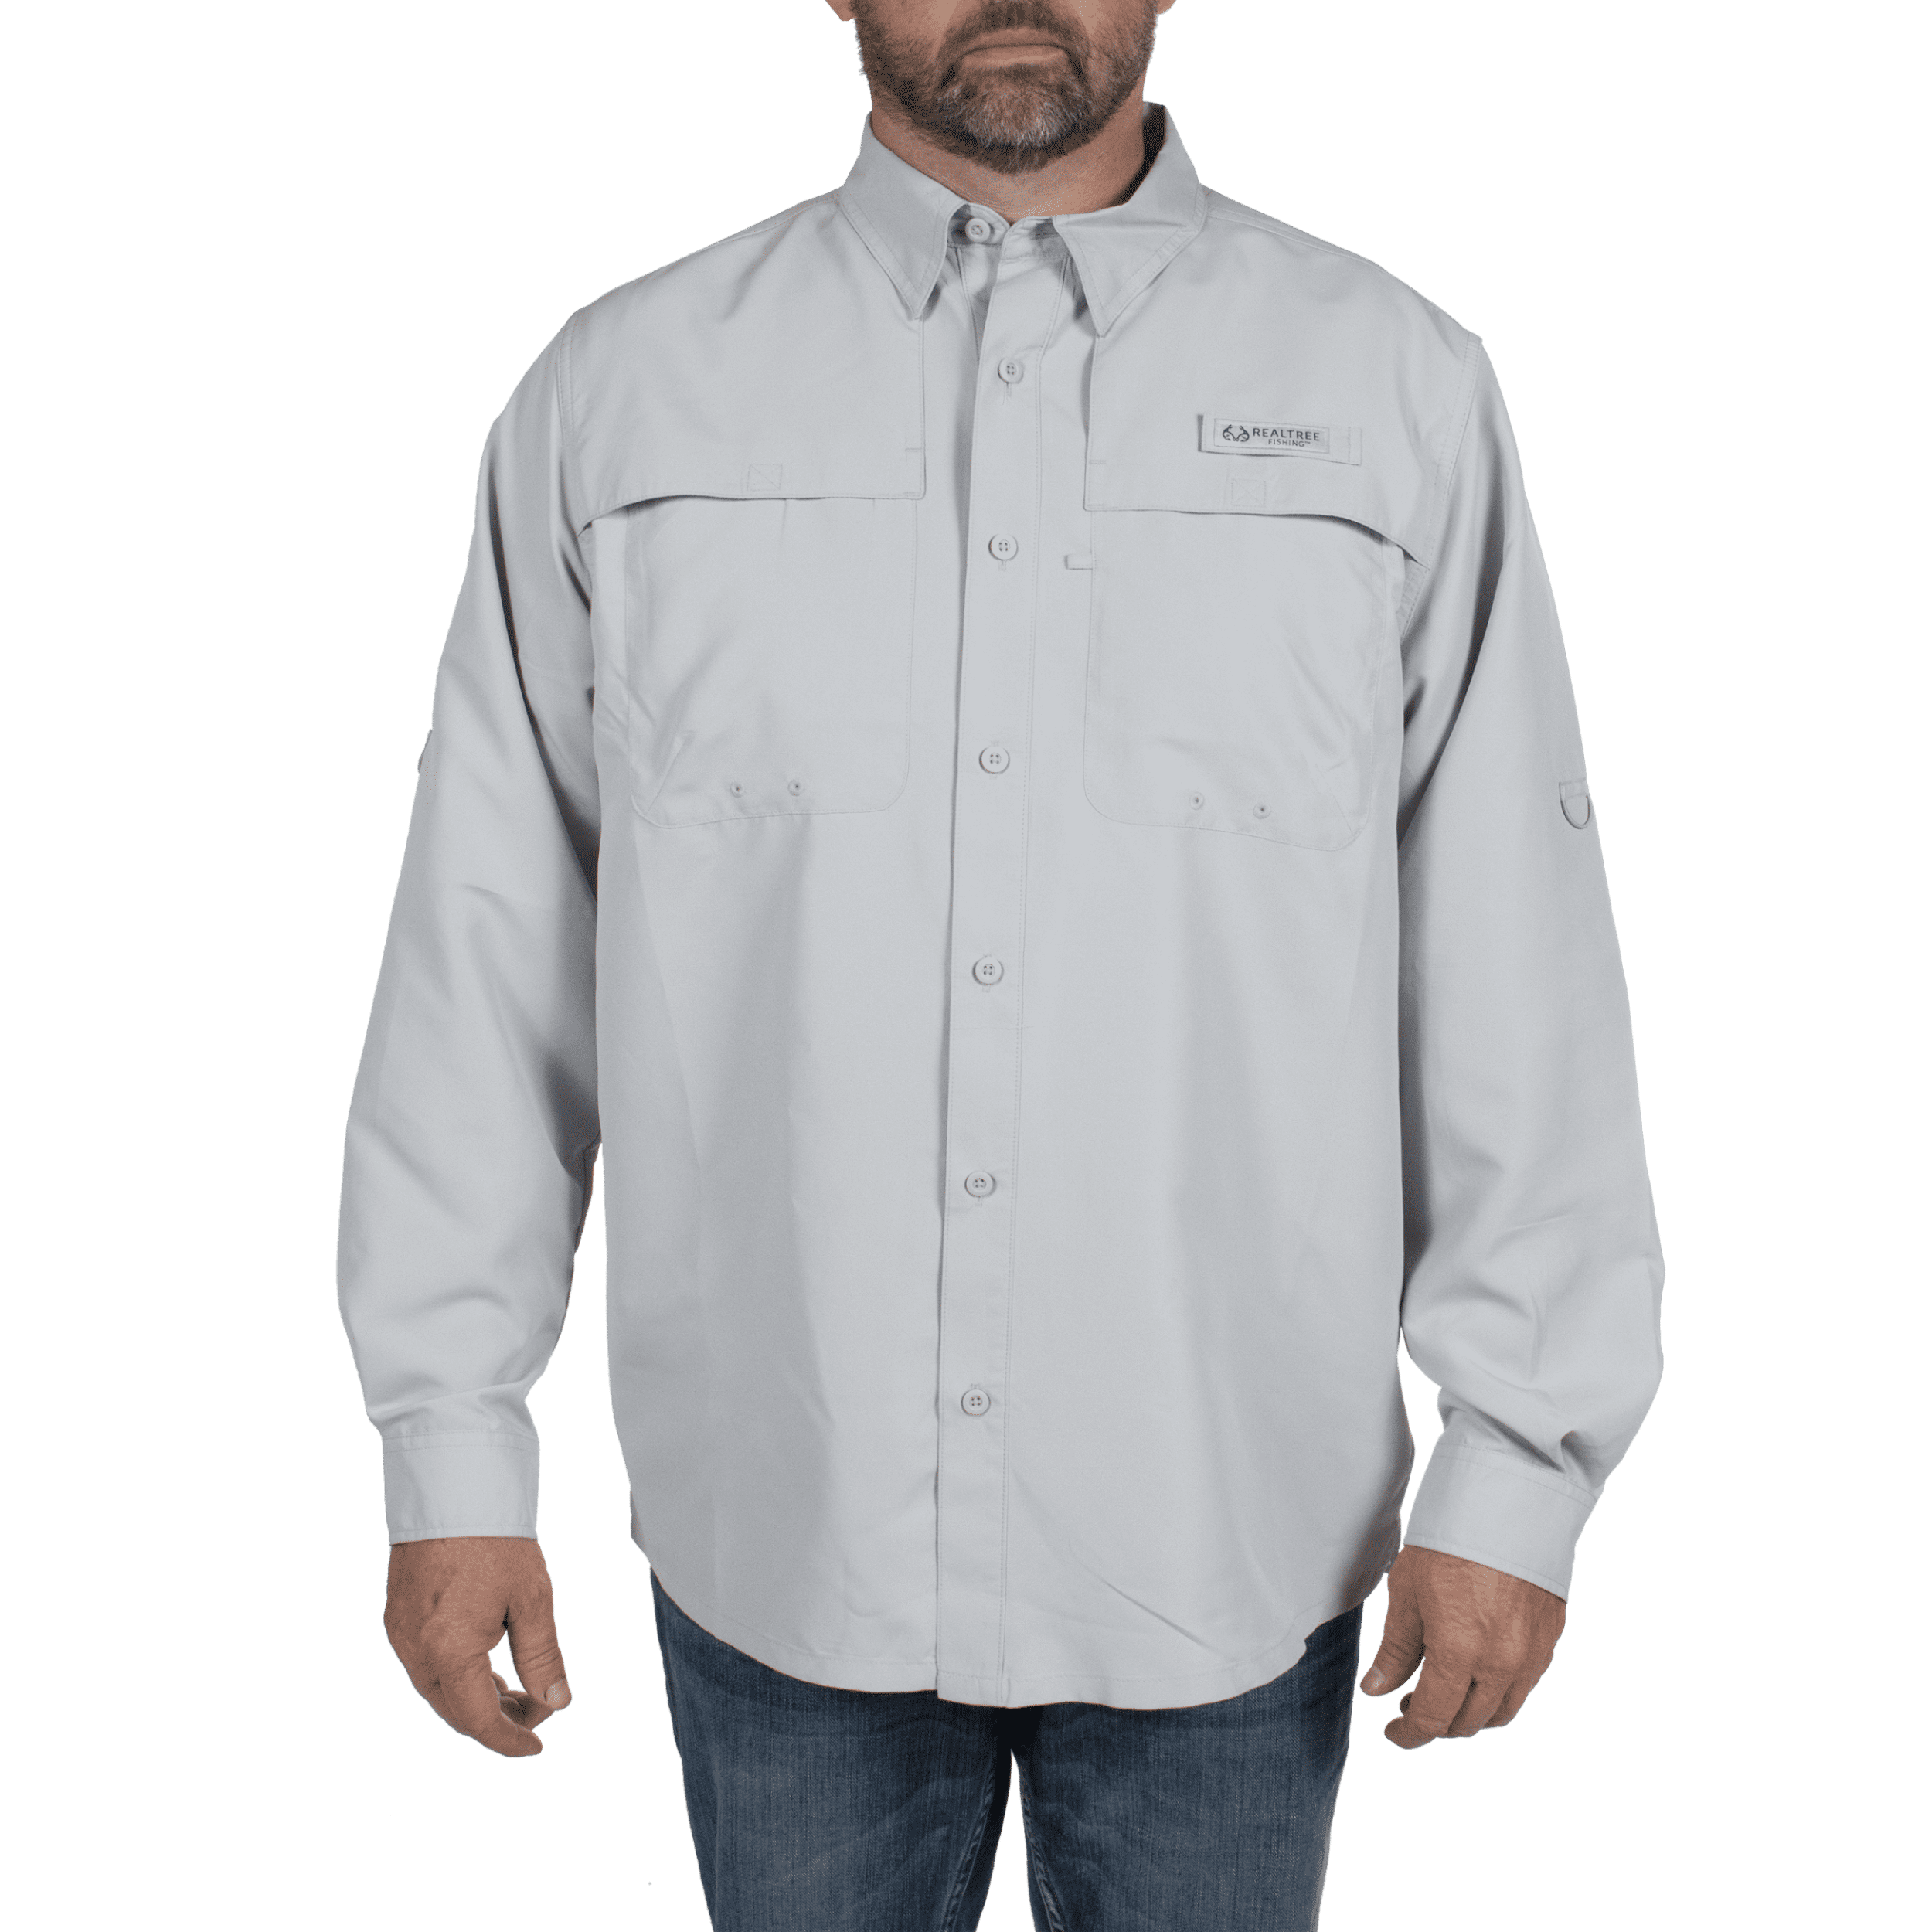 Realtree Long Sleeve Button Down Shirt (Men's), 1 Count, 1 Pack 